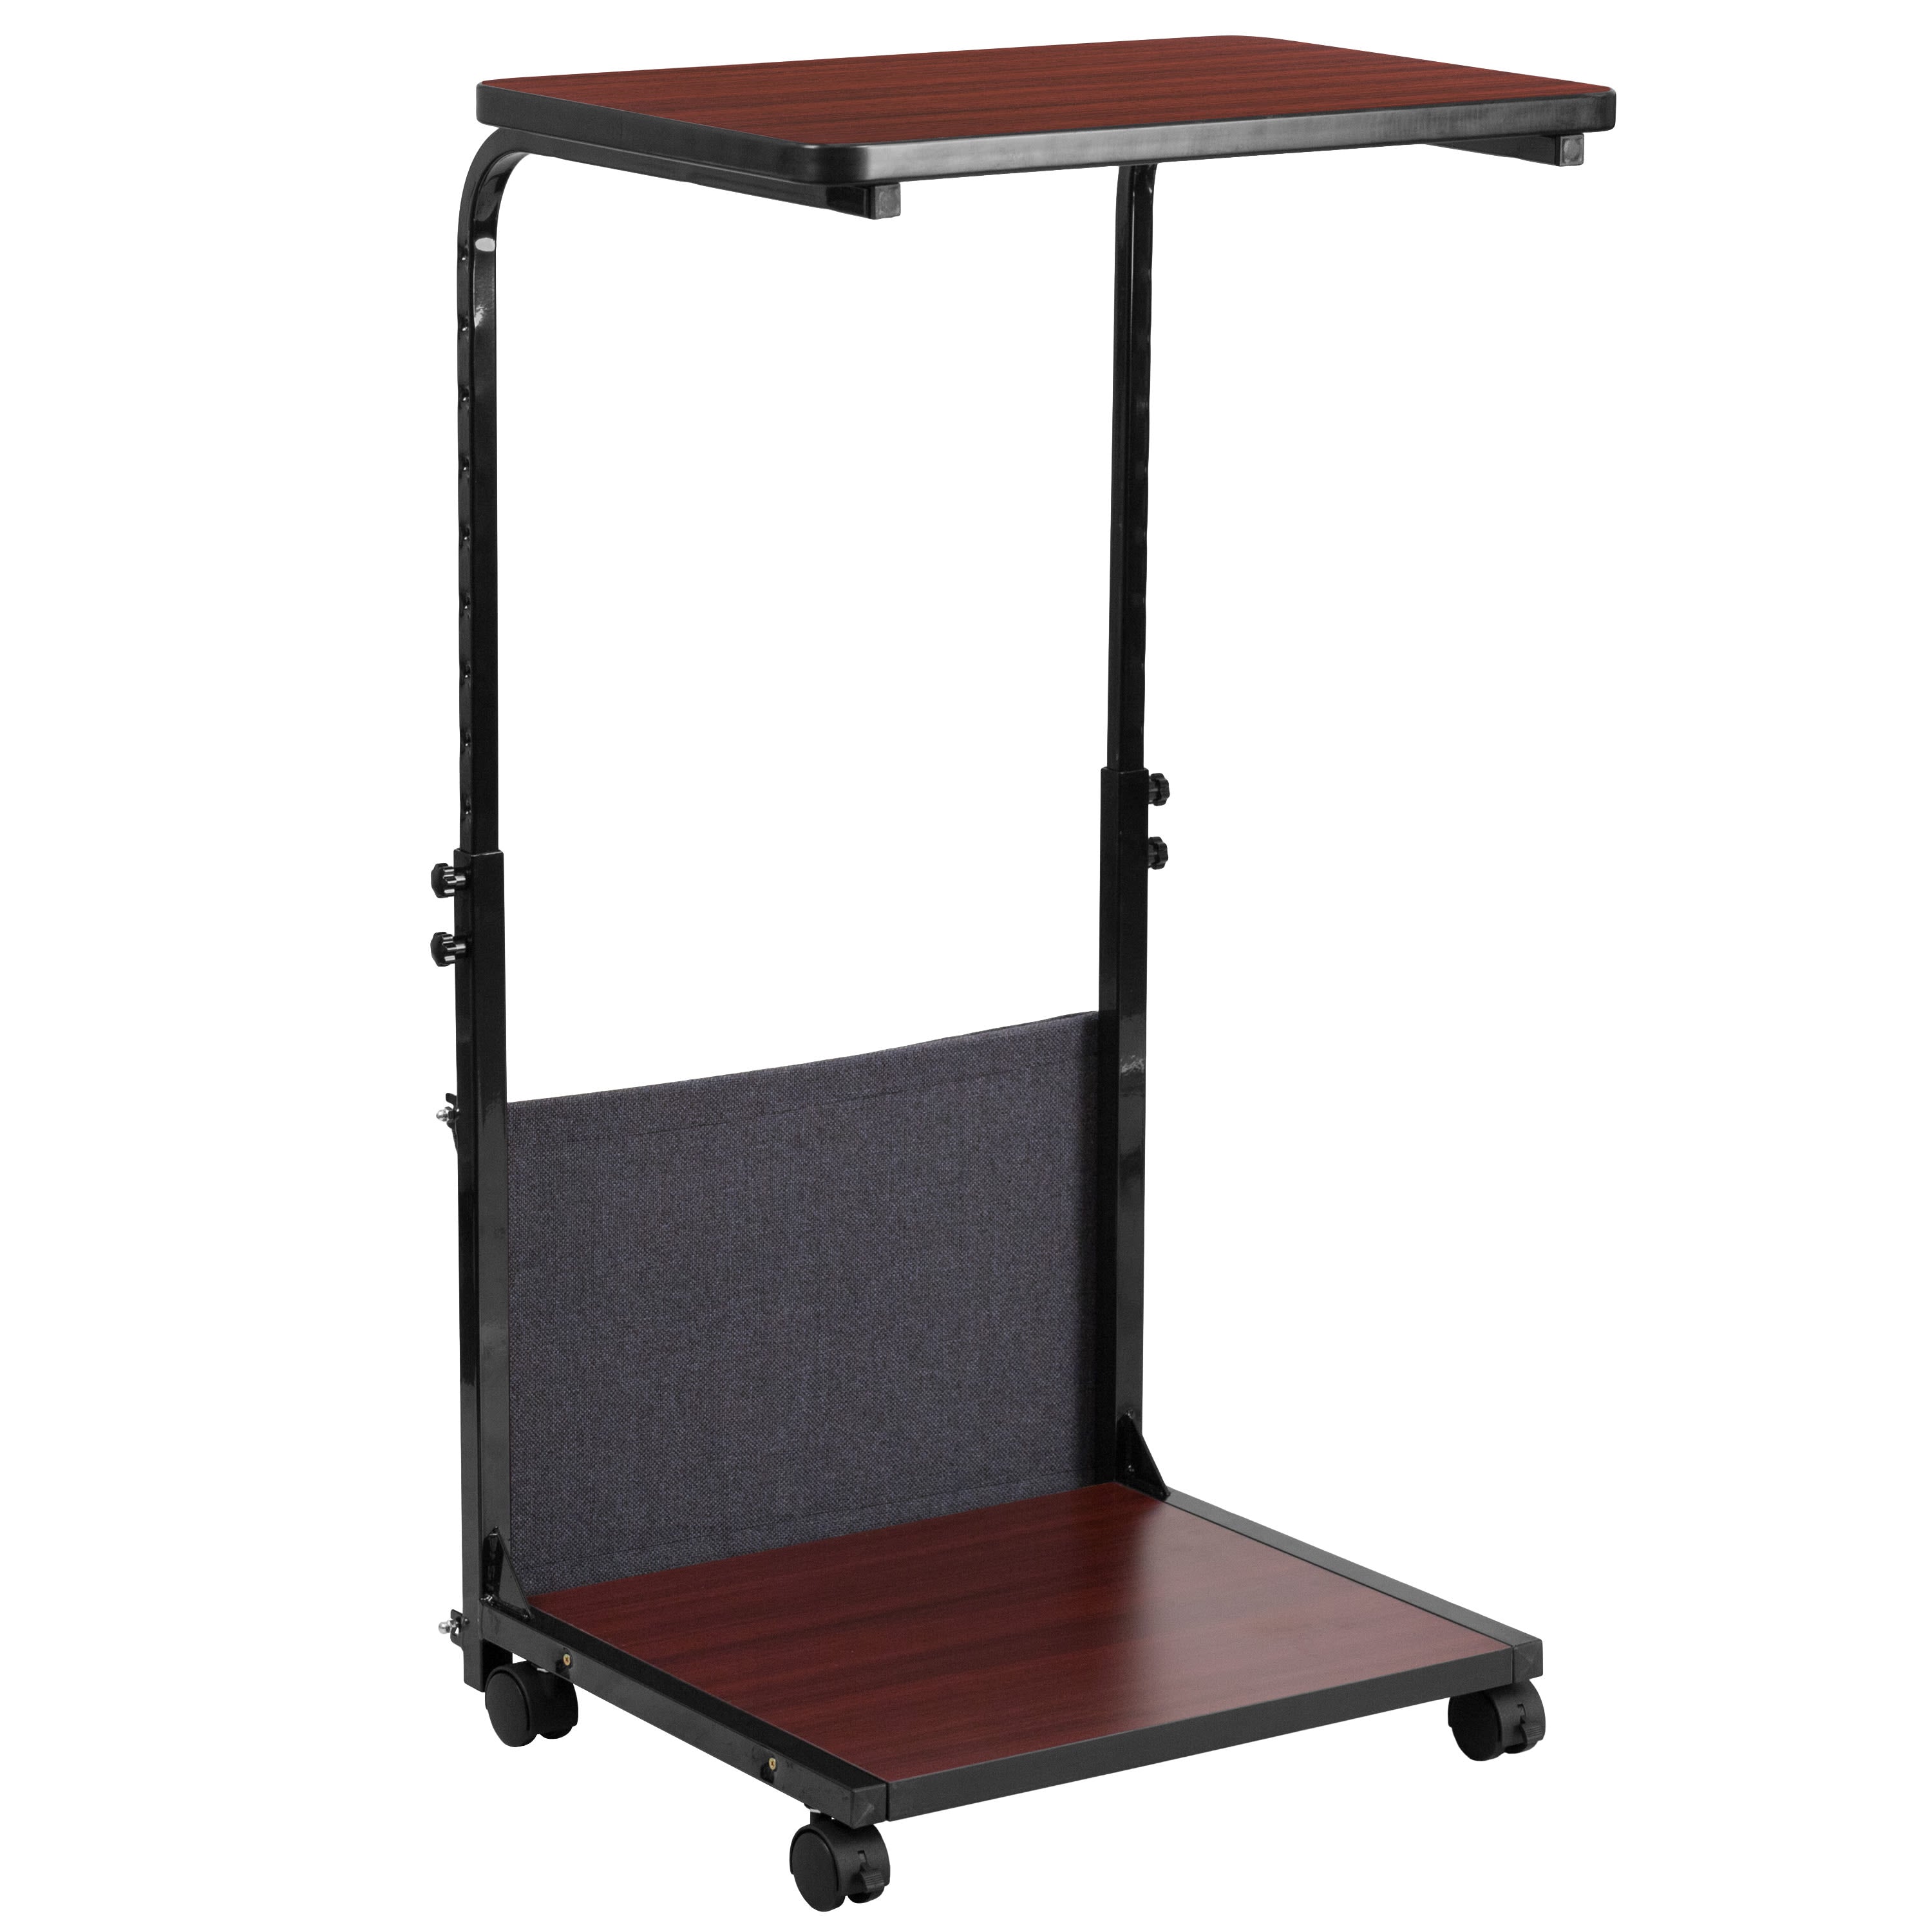 Mobile Sit-Down, Stand-Up Computer Ergonomic Desk with Removable Pouch (Adjustable Range 27' - 46.5')